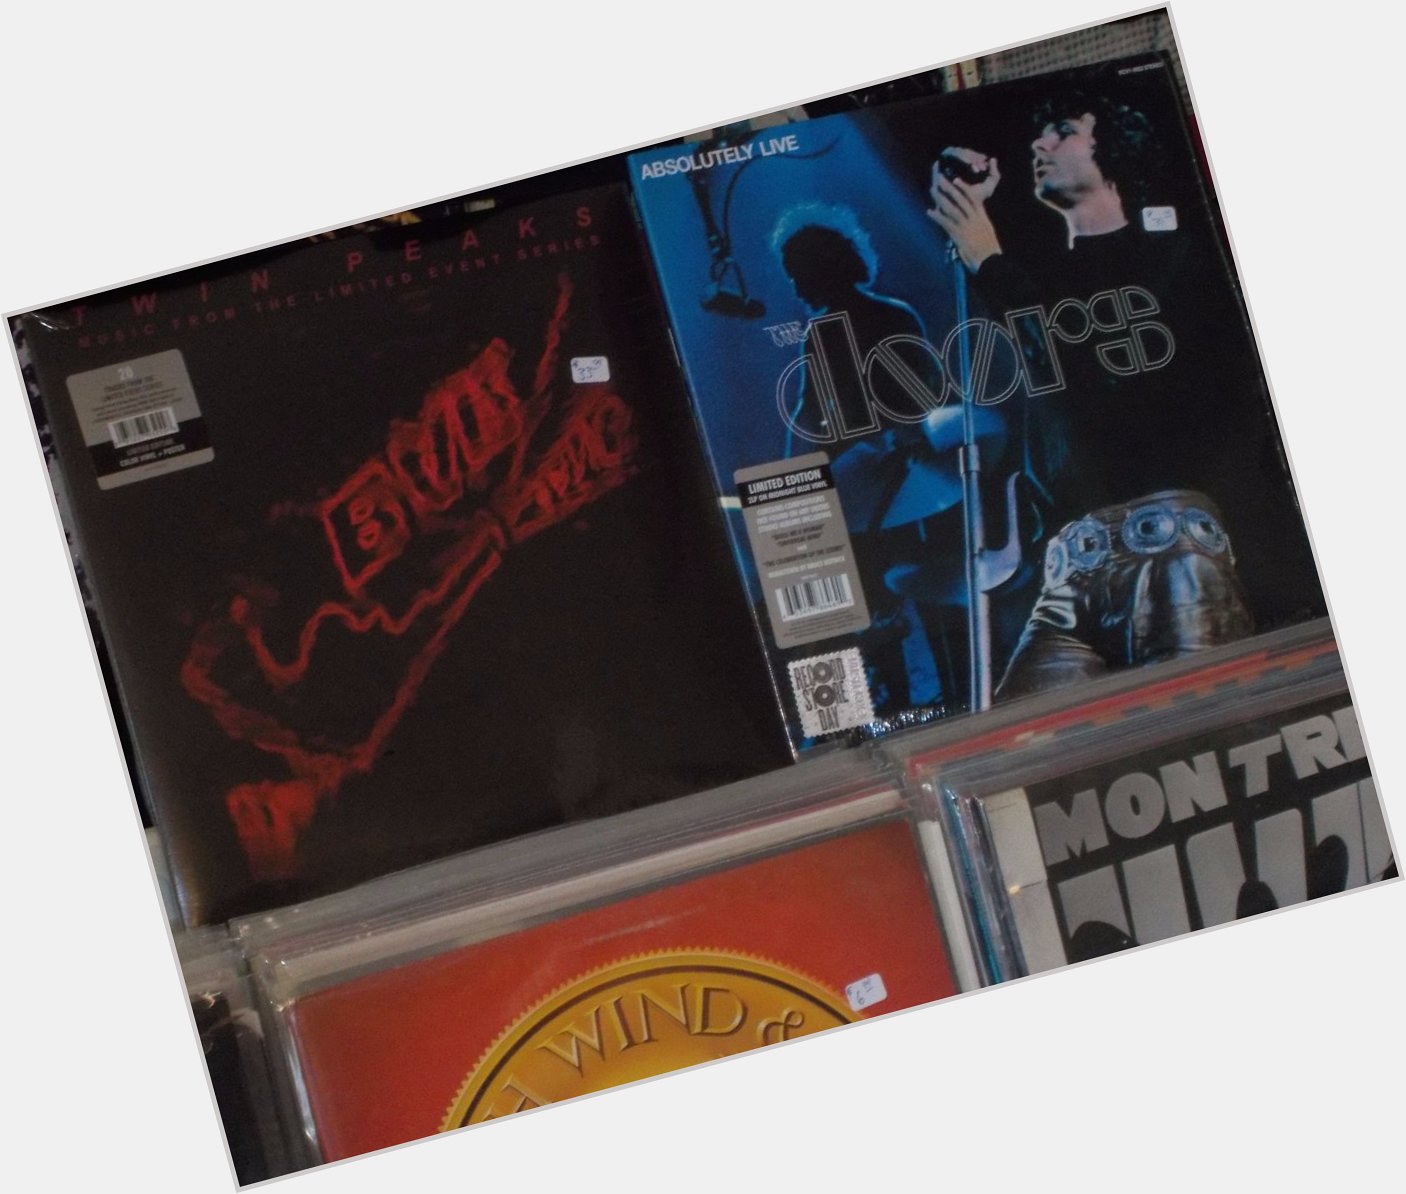 Happy Birthday to Julee Cruise who\s on the Twin Peaks soundtrack & John Densmore of the Doors 